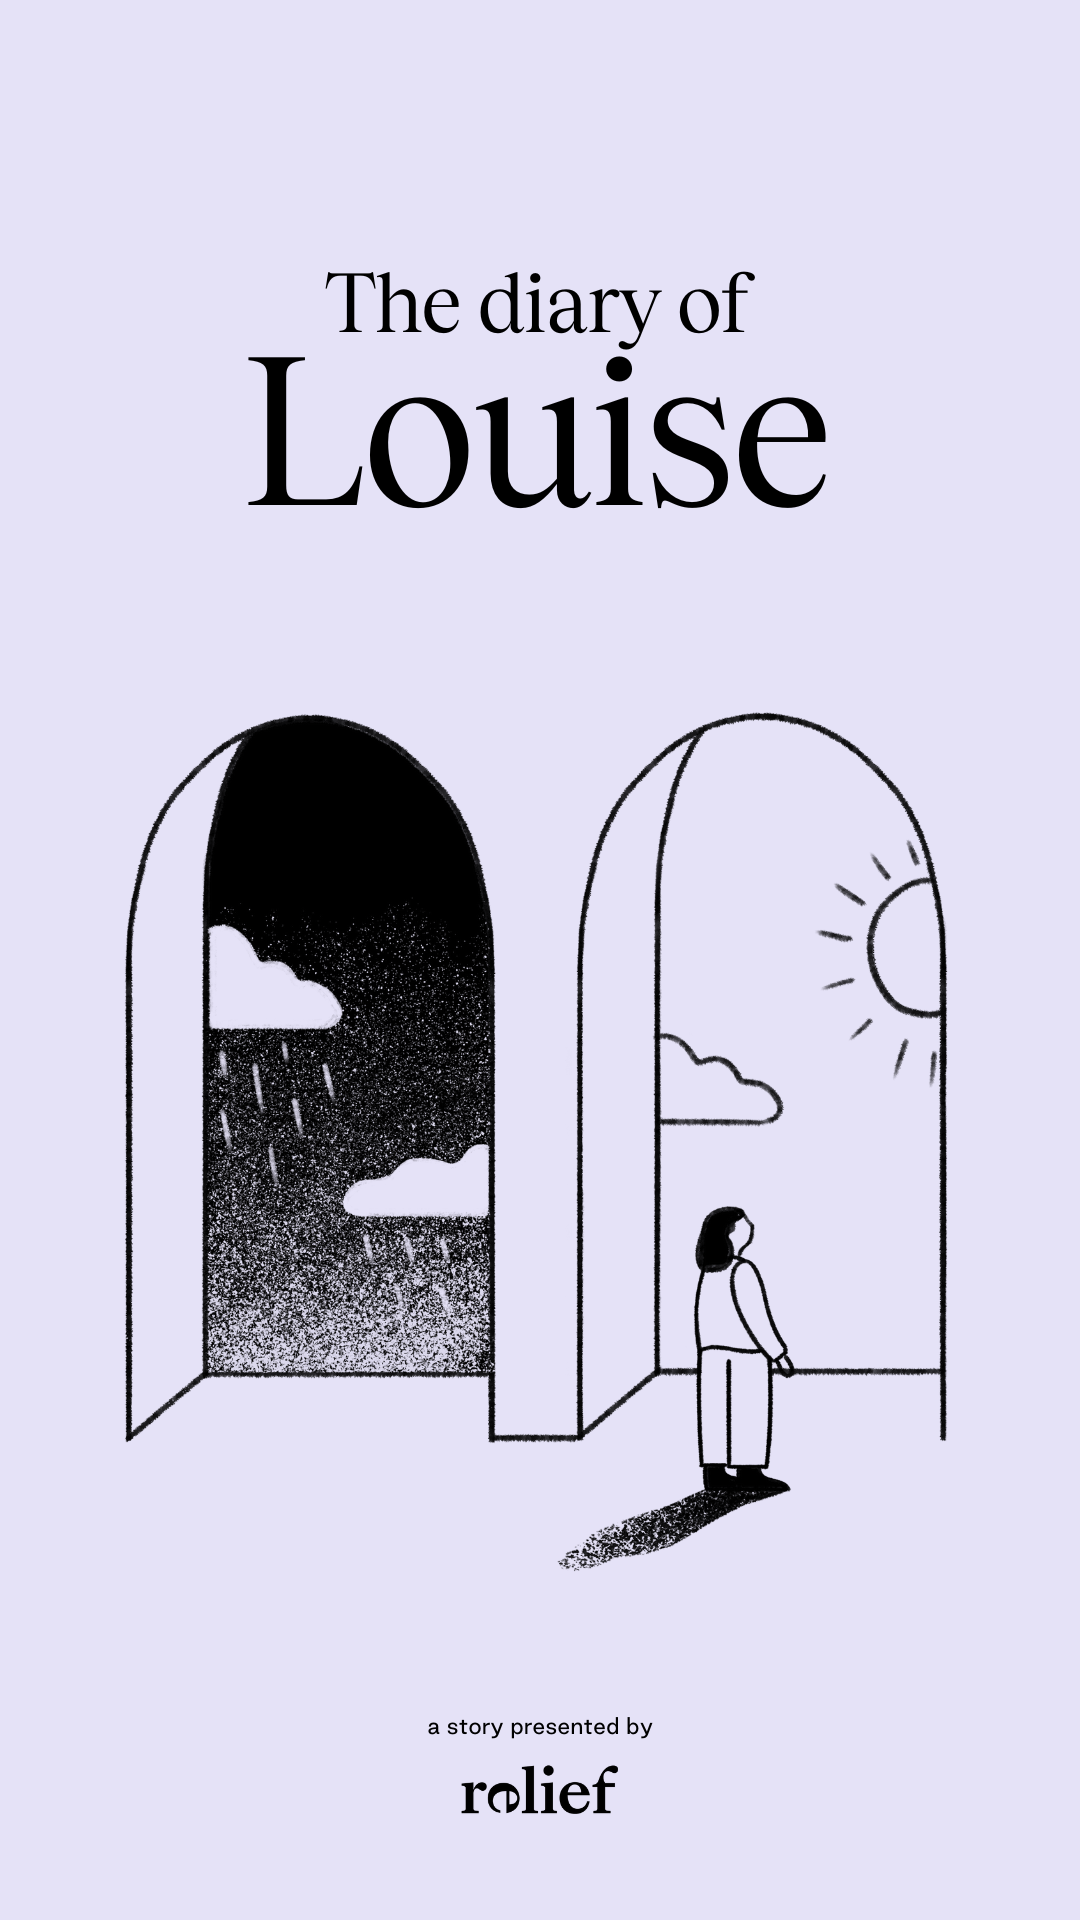 design-promotion-the-diary-of-louise